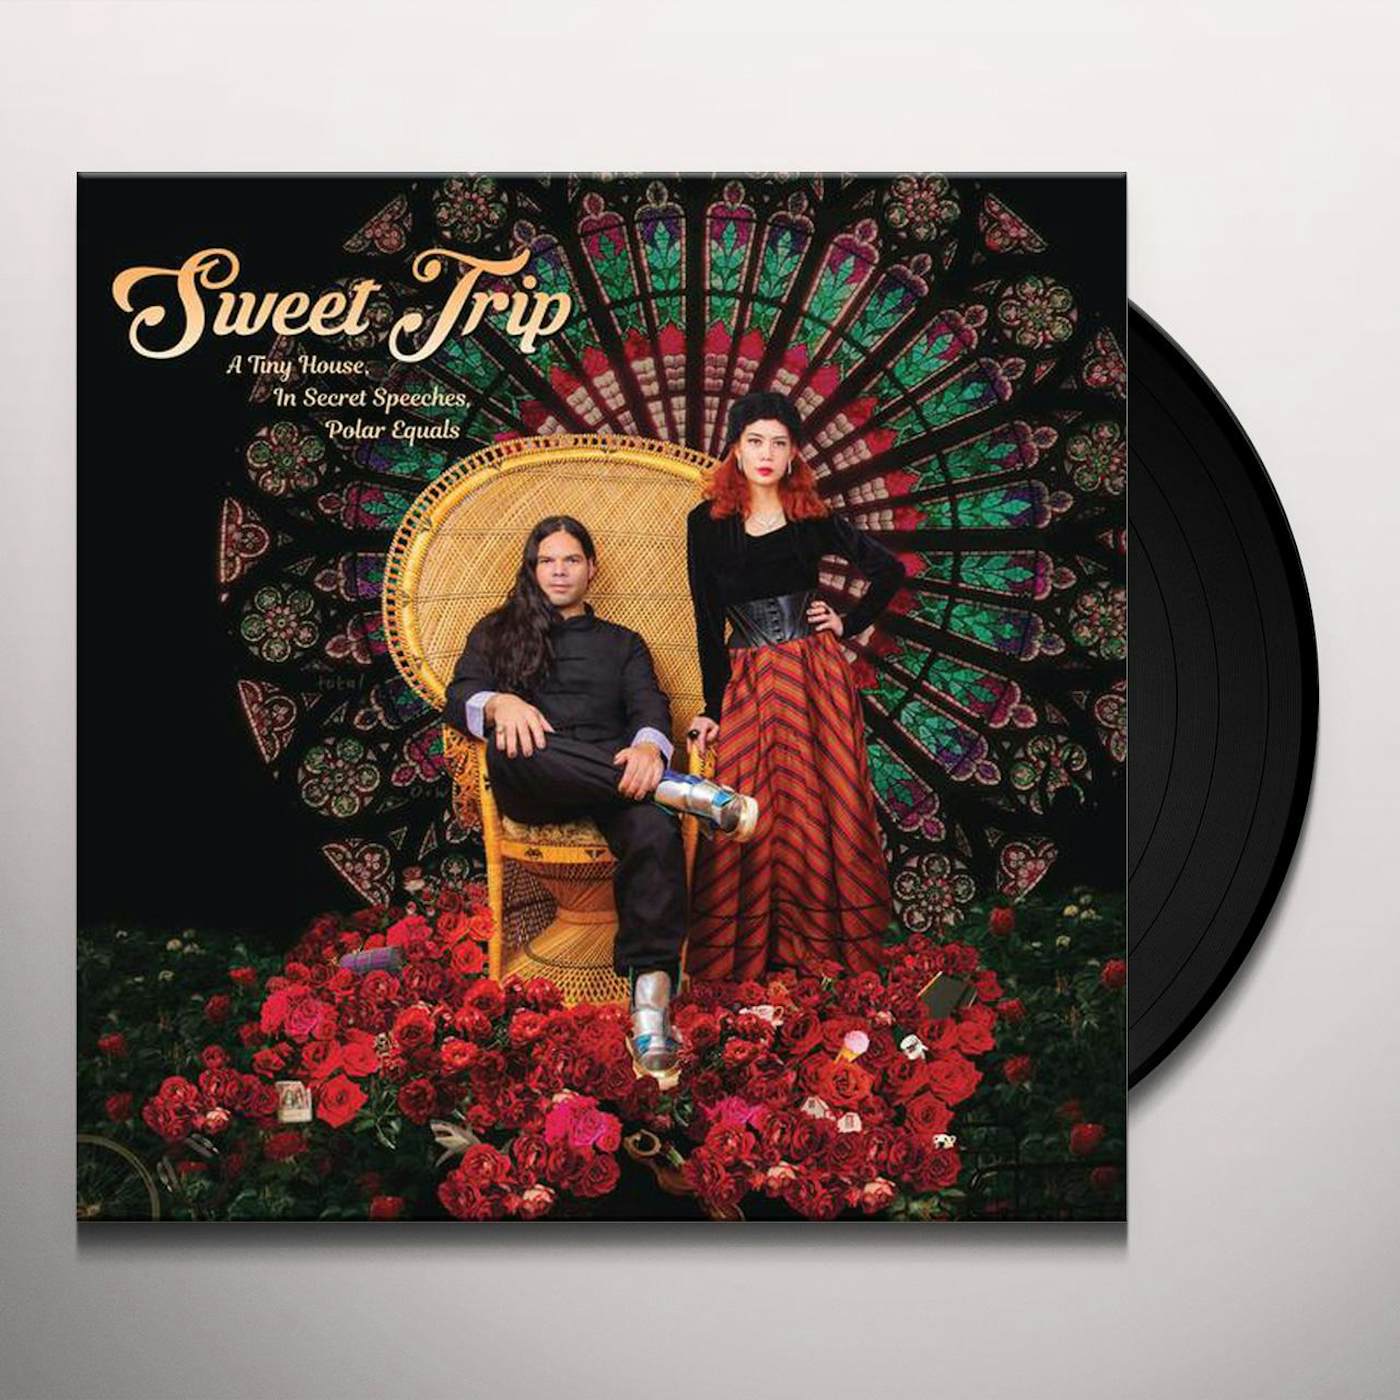 Sweet Trip TINY HOUSE IN SECRET SPEECHES POLAR EQUALS-COVER A Vinyl Record